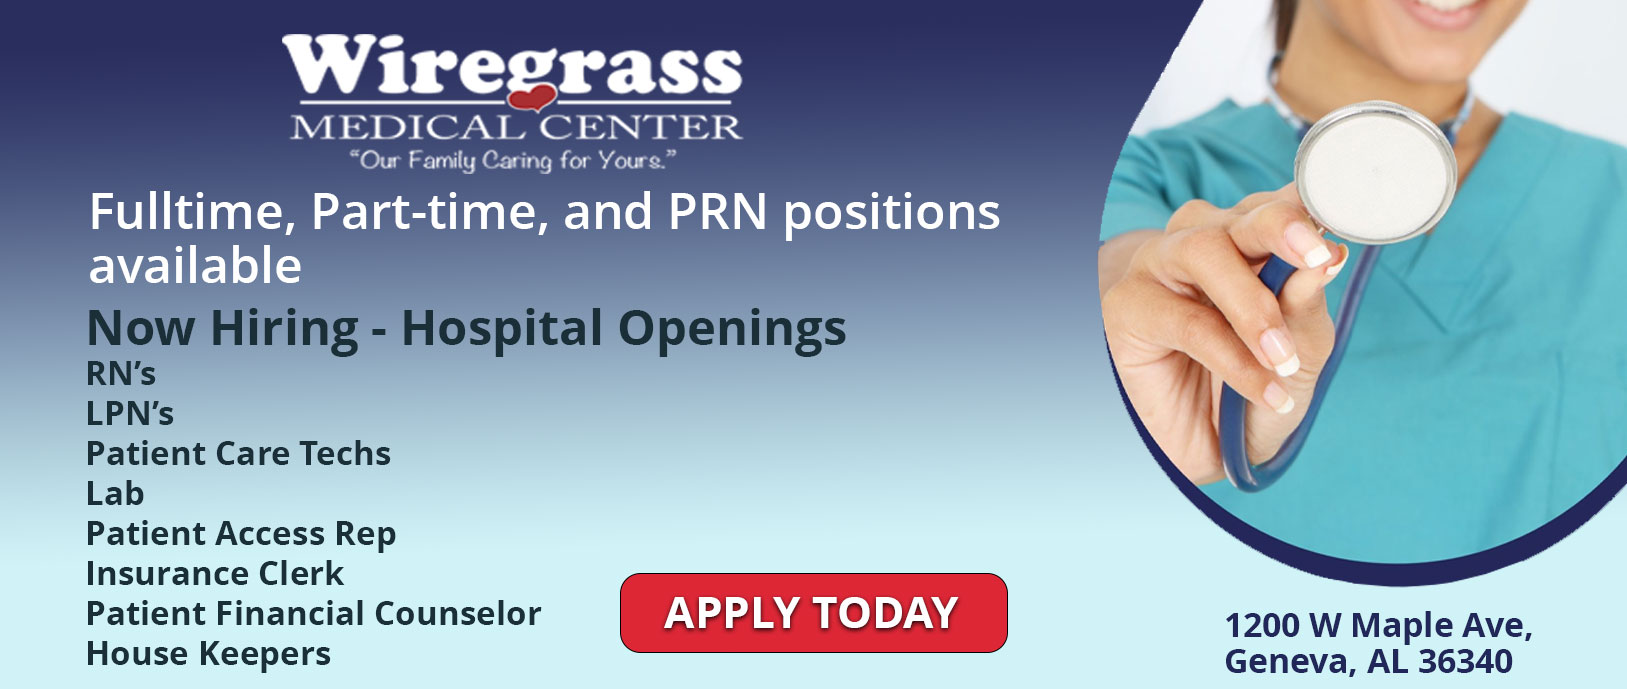 Banner picture of female Nurse holding a stethoscope up to the camera. Banner says:

Full-time, Part-time, and PRN positions available 
Now Hiring- Hospital Openings
RN's
LPN's
Patient Care Techs
Lab
Patient Access Rep
Insurance Clerk
Patient Financial Counselor
House Keepers

1200 W Male Ave,
Geneva, AL 36340

(APPLY TODAY)